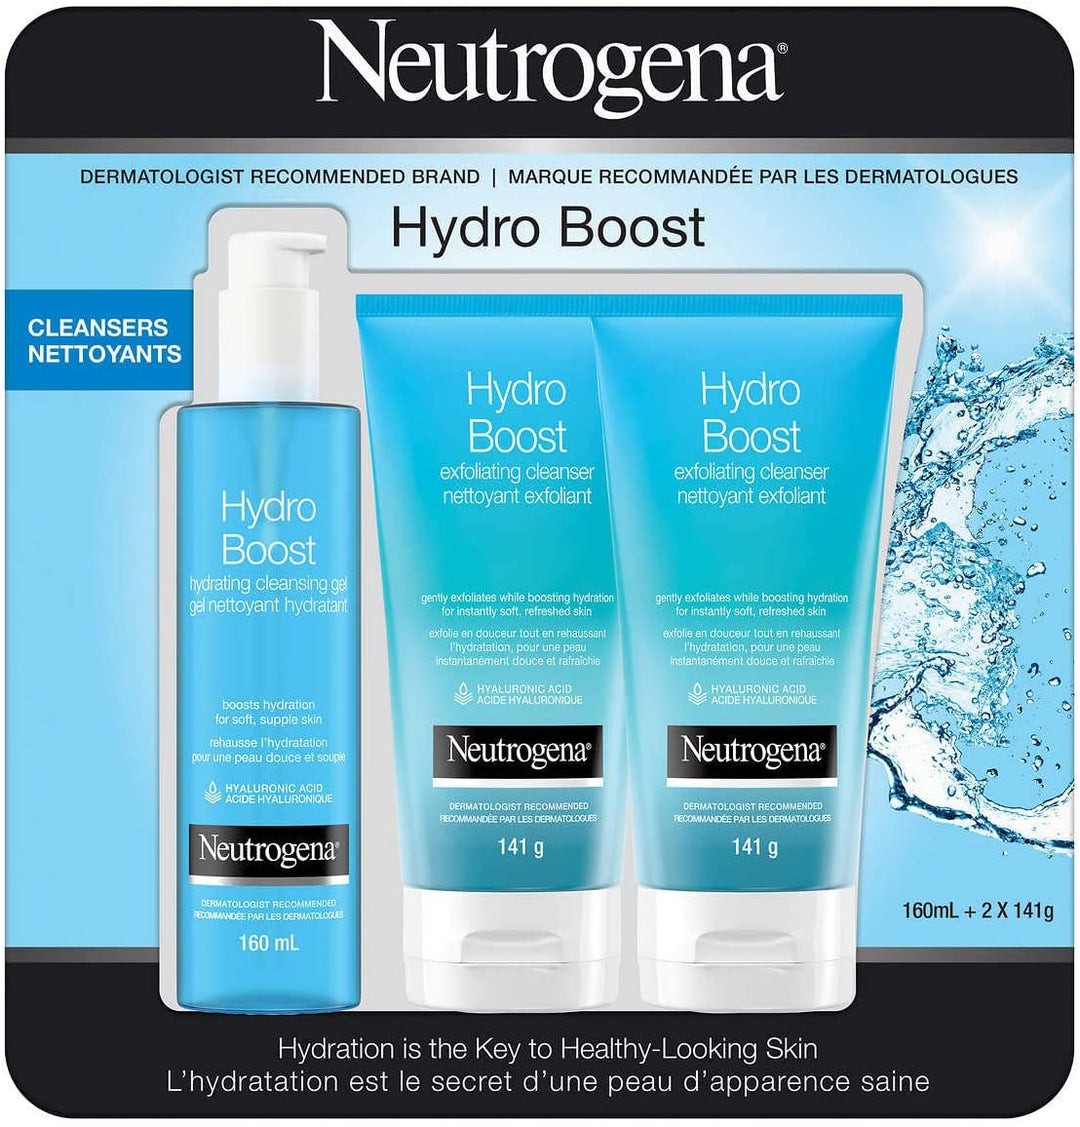 Neutrogena - Set of 3 Exfoliating Facial Cleansers, Hydro Boost 